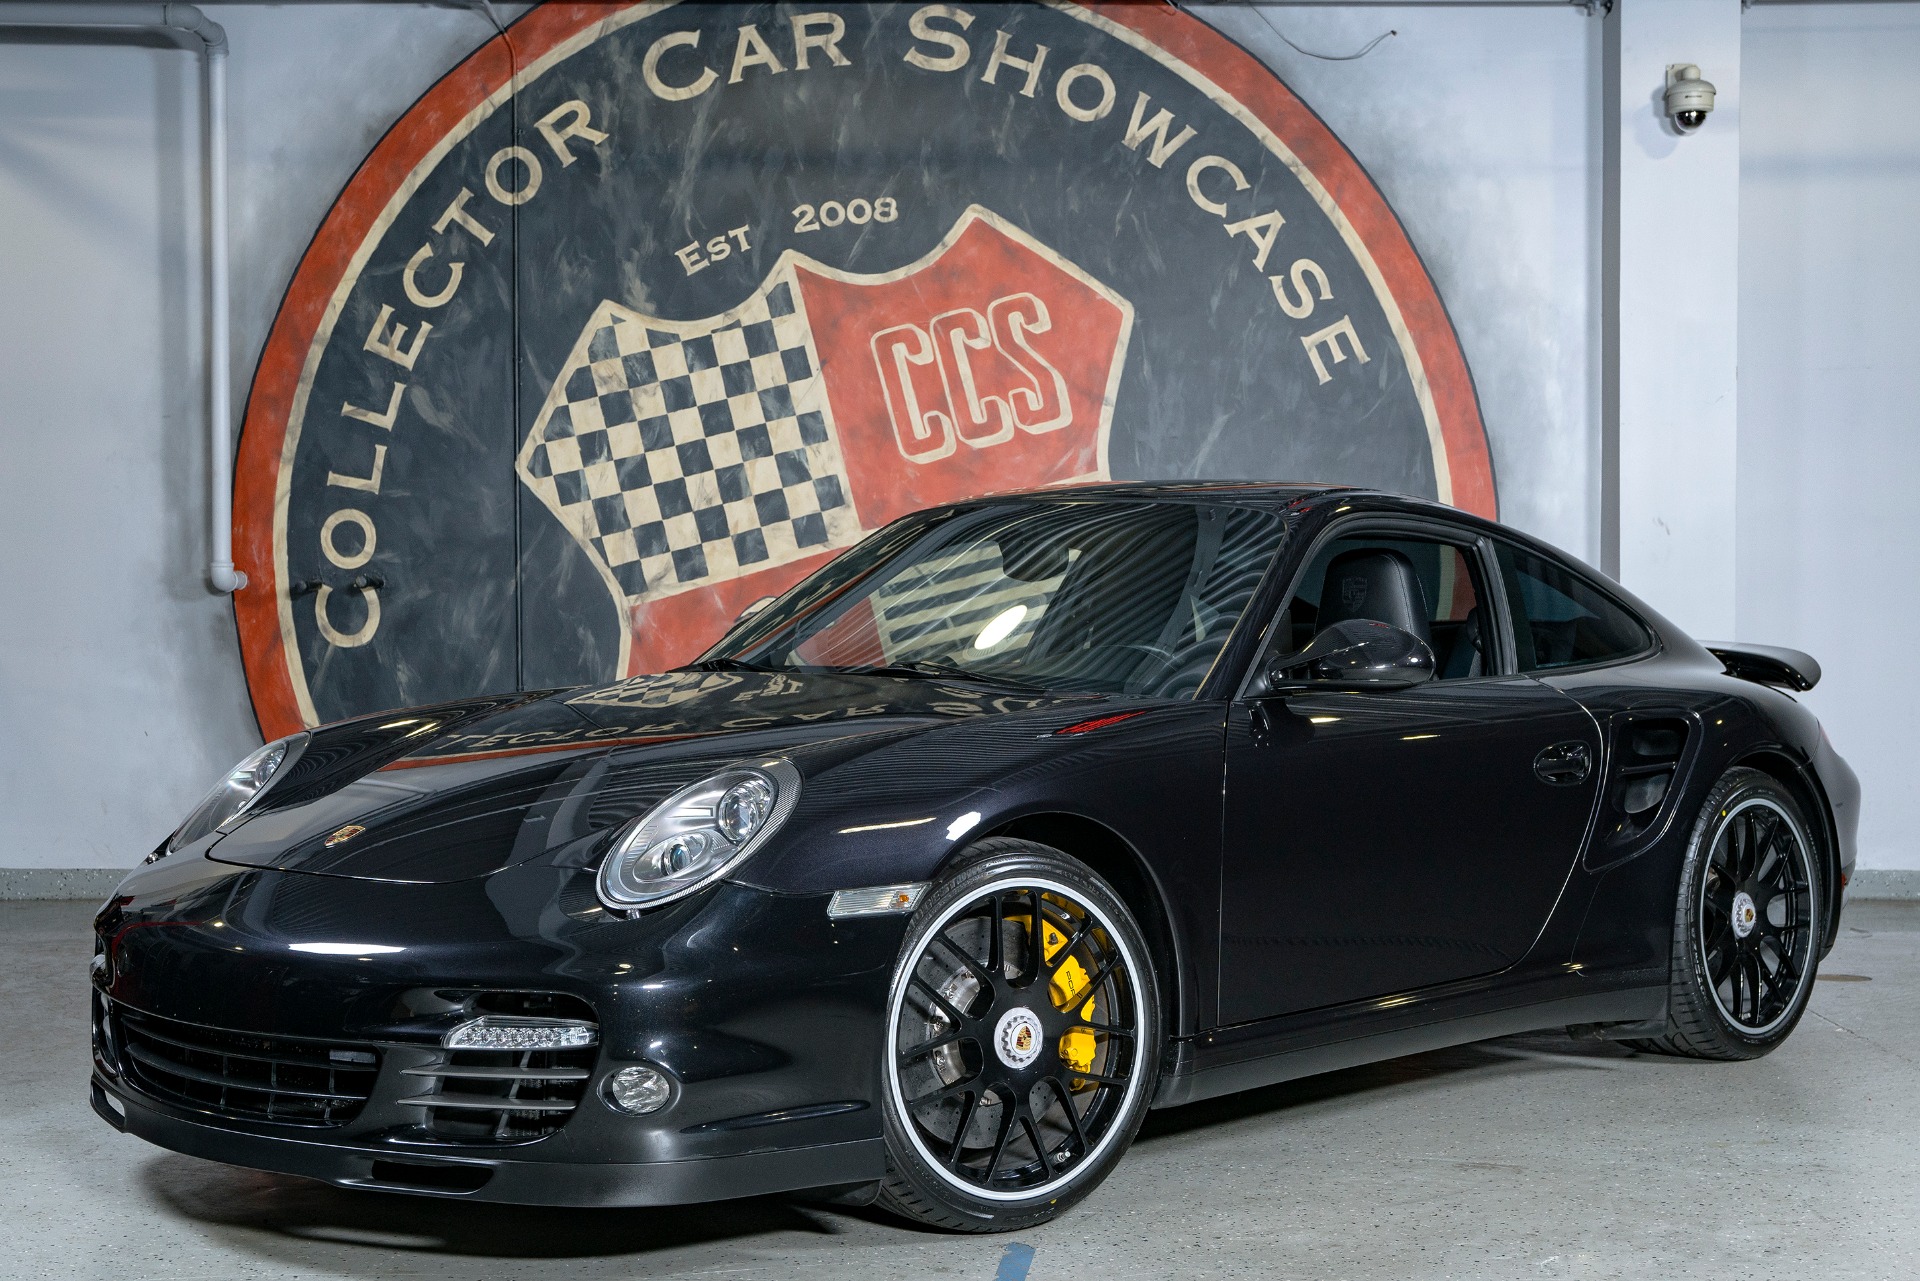 2012 Porsche 911 Turbo S Stock 1505 For Sale Near Oyster